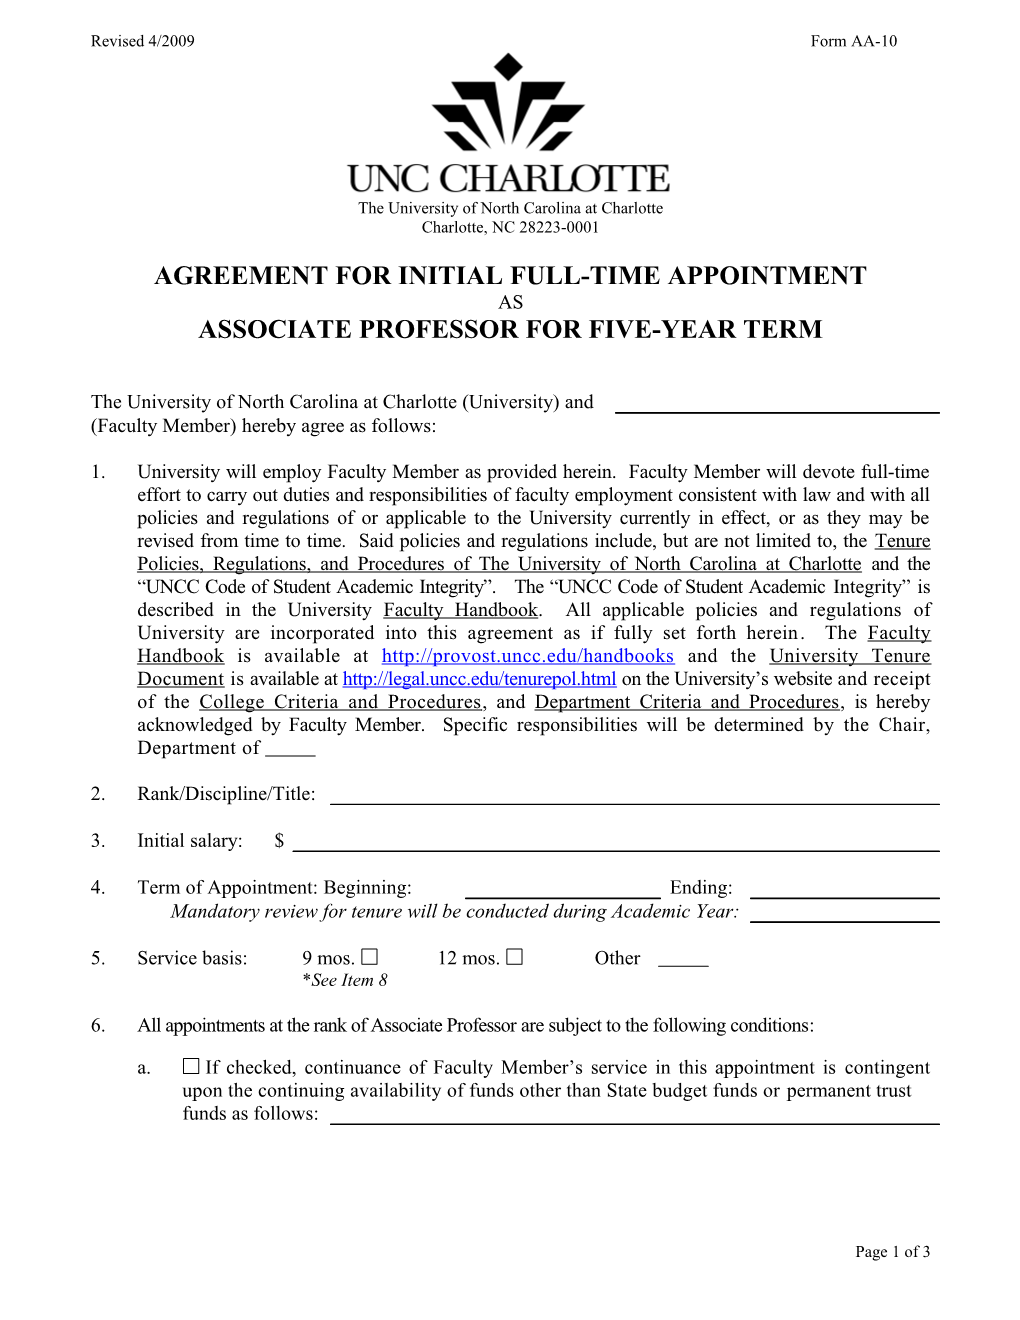 Agreement for Initial Full-Time Appointment As Associate Professor for Five-Year Term